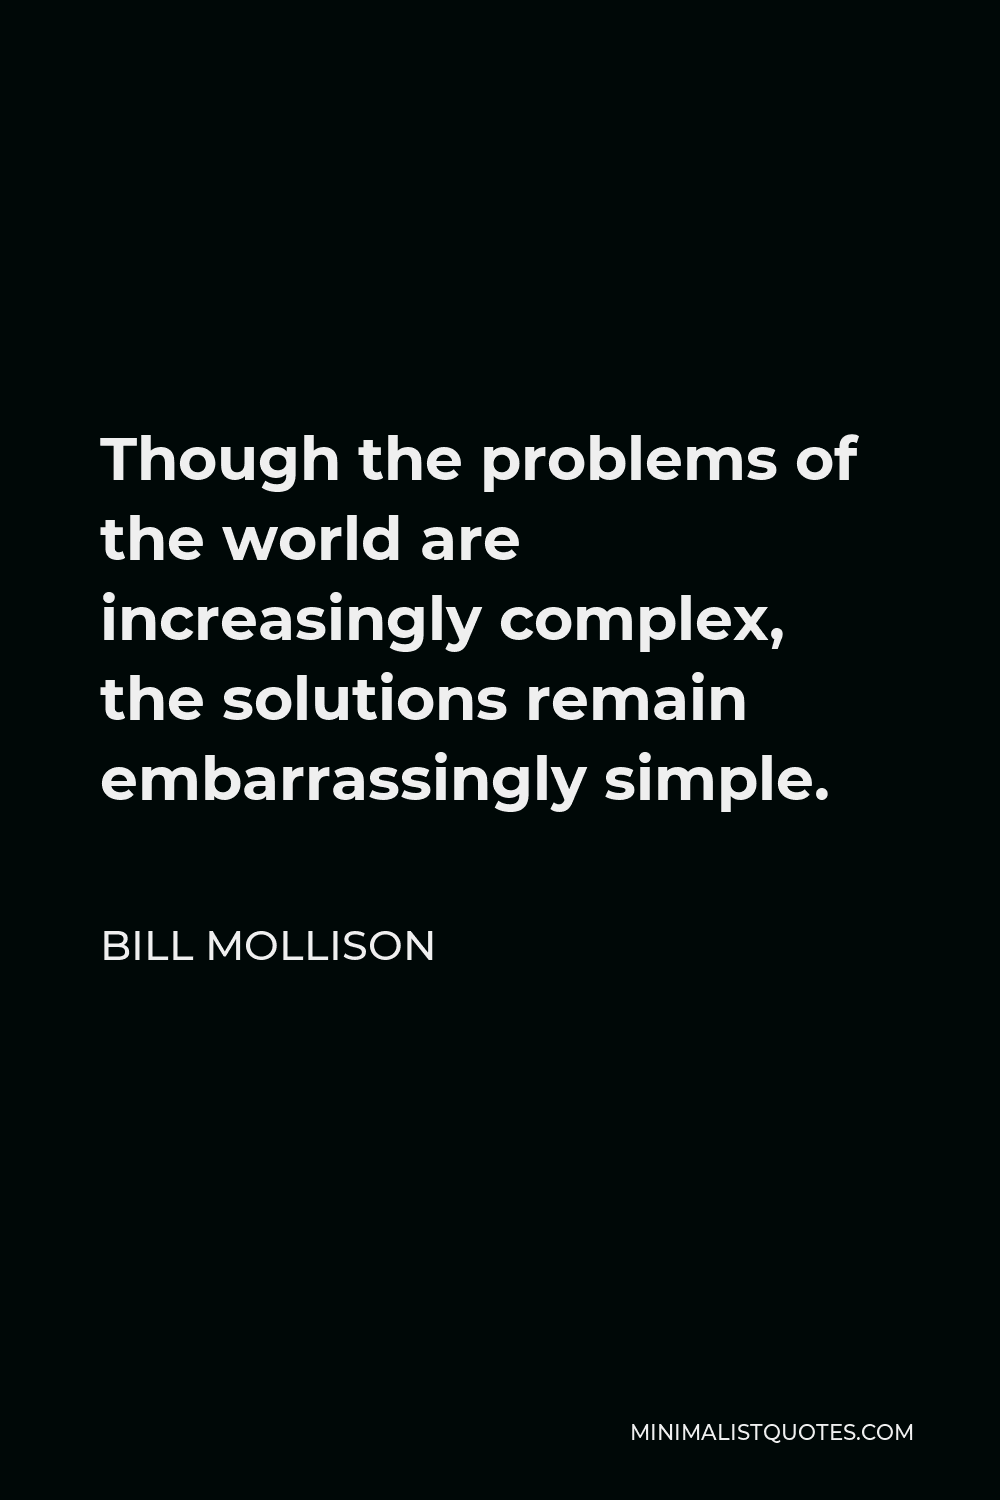 Bill Mollison Quote - Though the problems of the world are increasingly complex, the solutions remain embarrassingly simple.